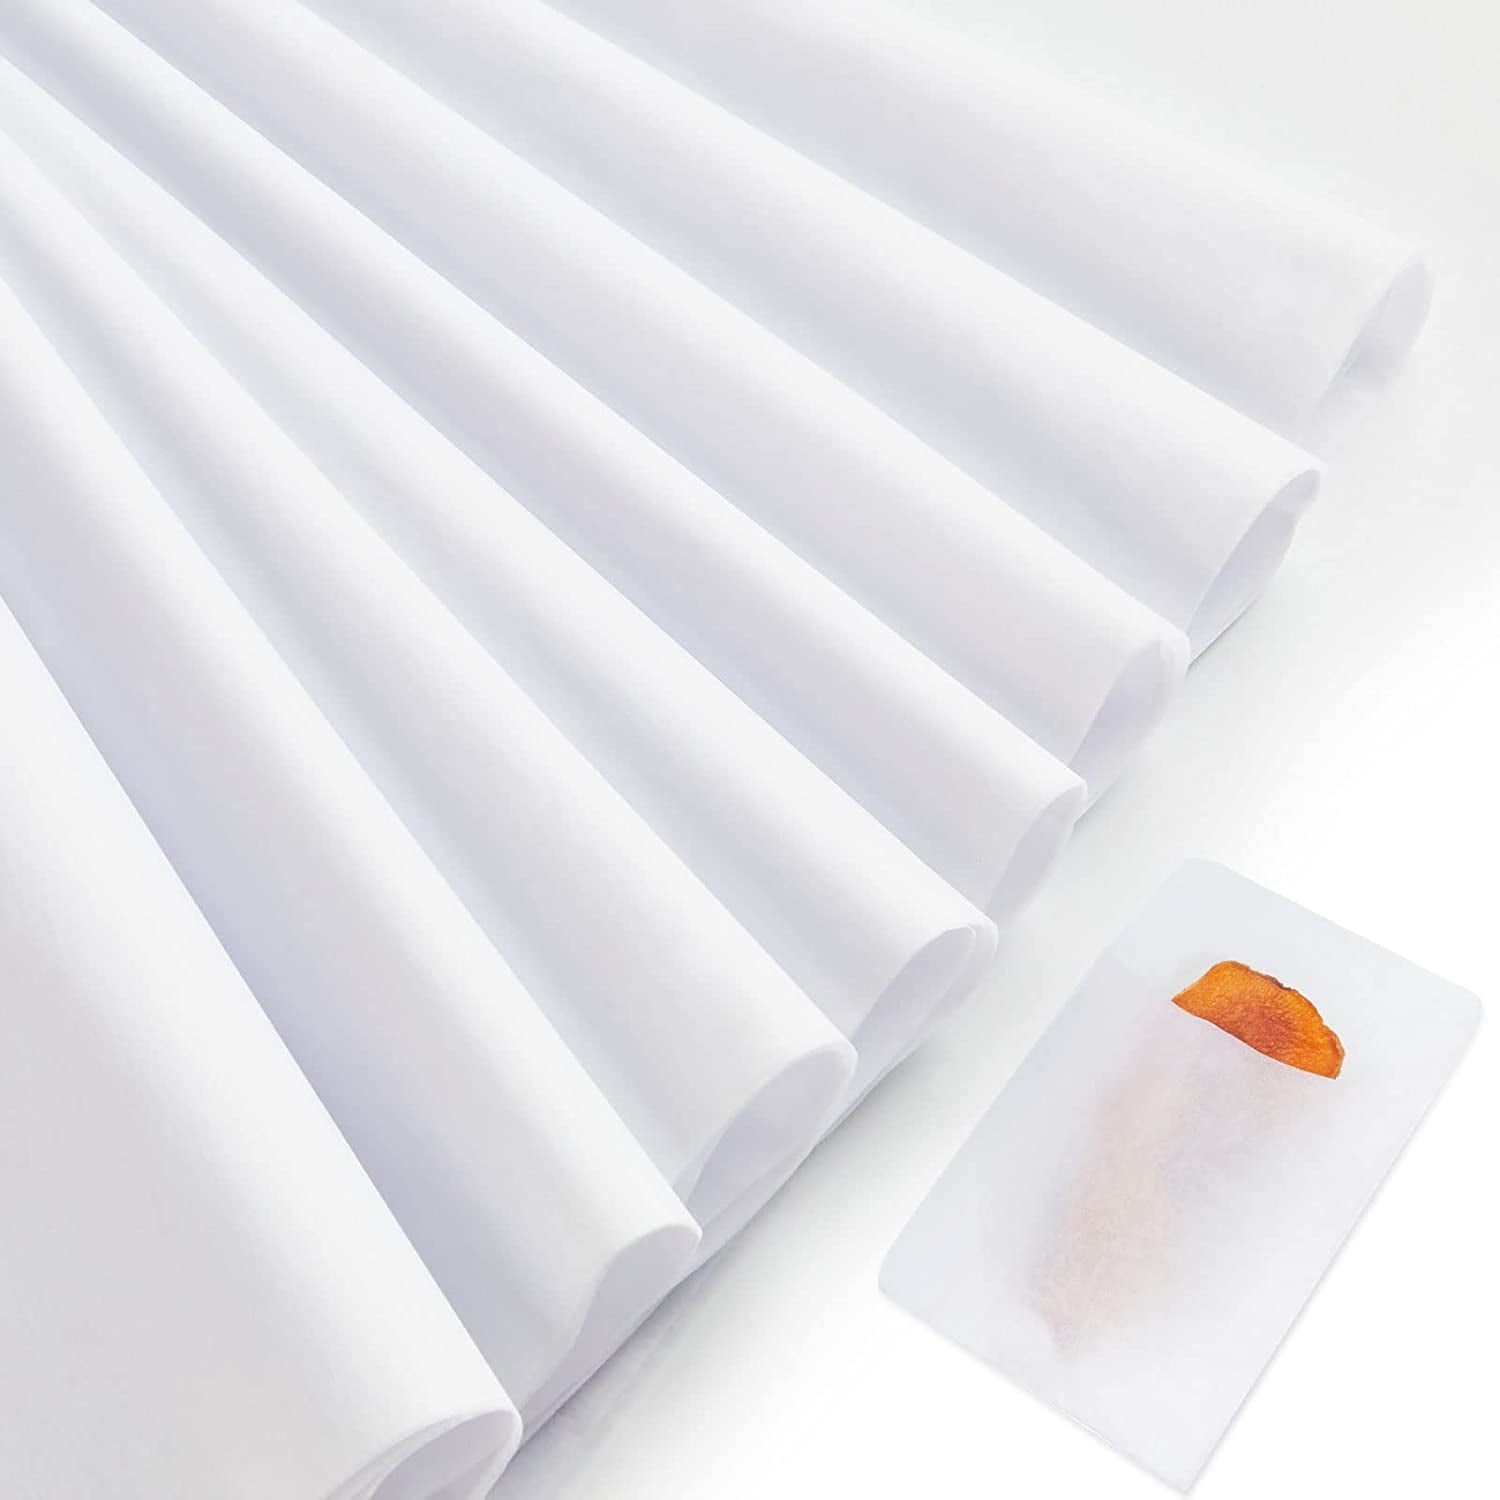  125 Sheets 20 x 30 Acid-Free Wrapping Tissue Paper, Large  White Unbuffered No Lignin Archival Tissue Paper, No Acid Paper for  Long-Term Packaging Storing Clothes Textiles Linens Present Wrap : Arts